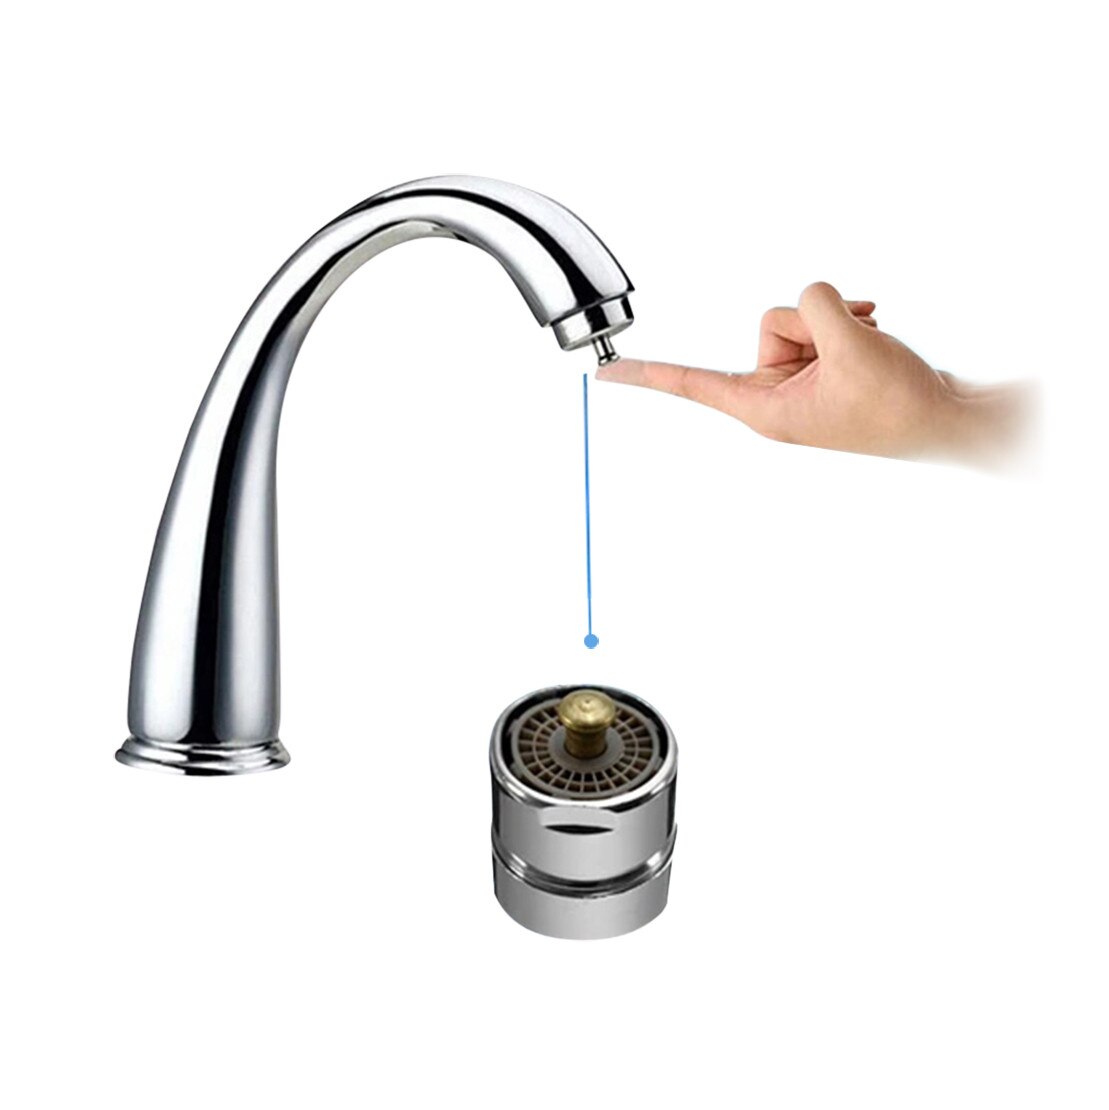 Water saving faucet aeration valve one-touch control faucet touch water-saving valve male thread 23.6mm bubble purifier kitchen